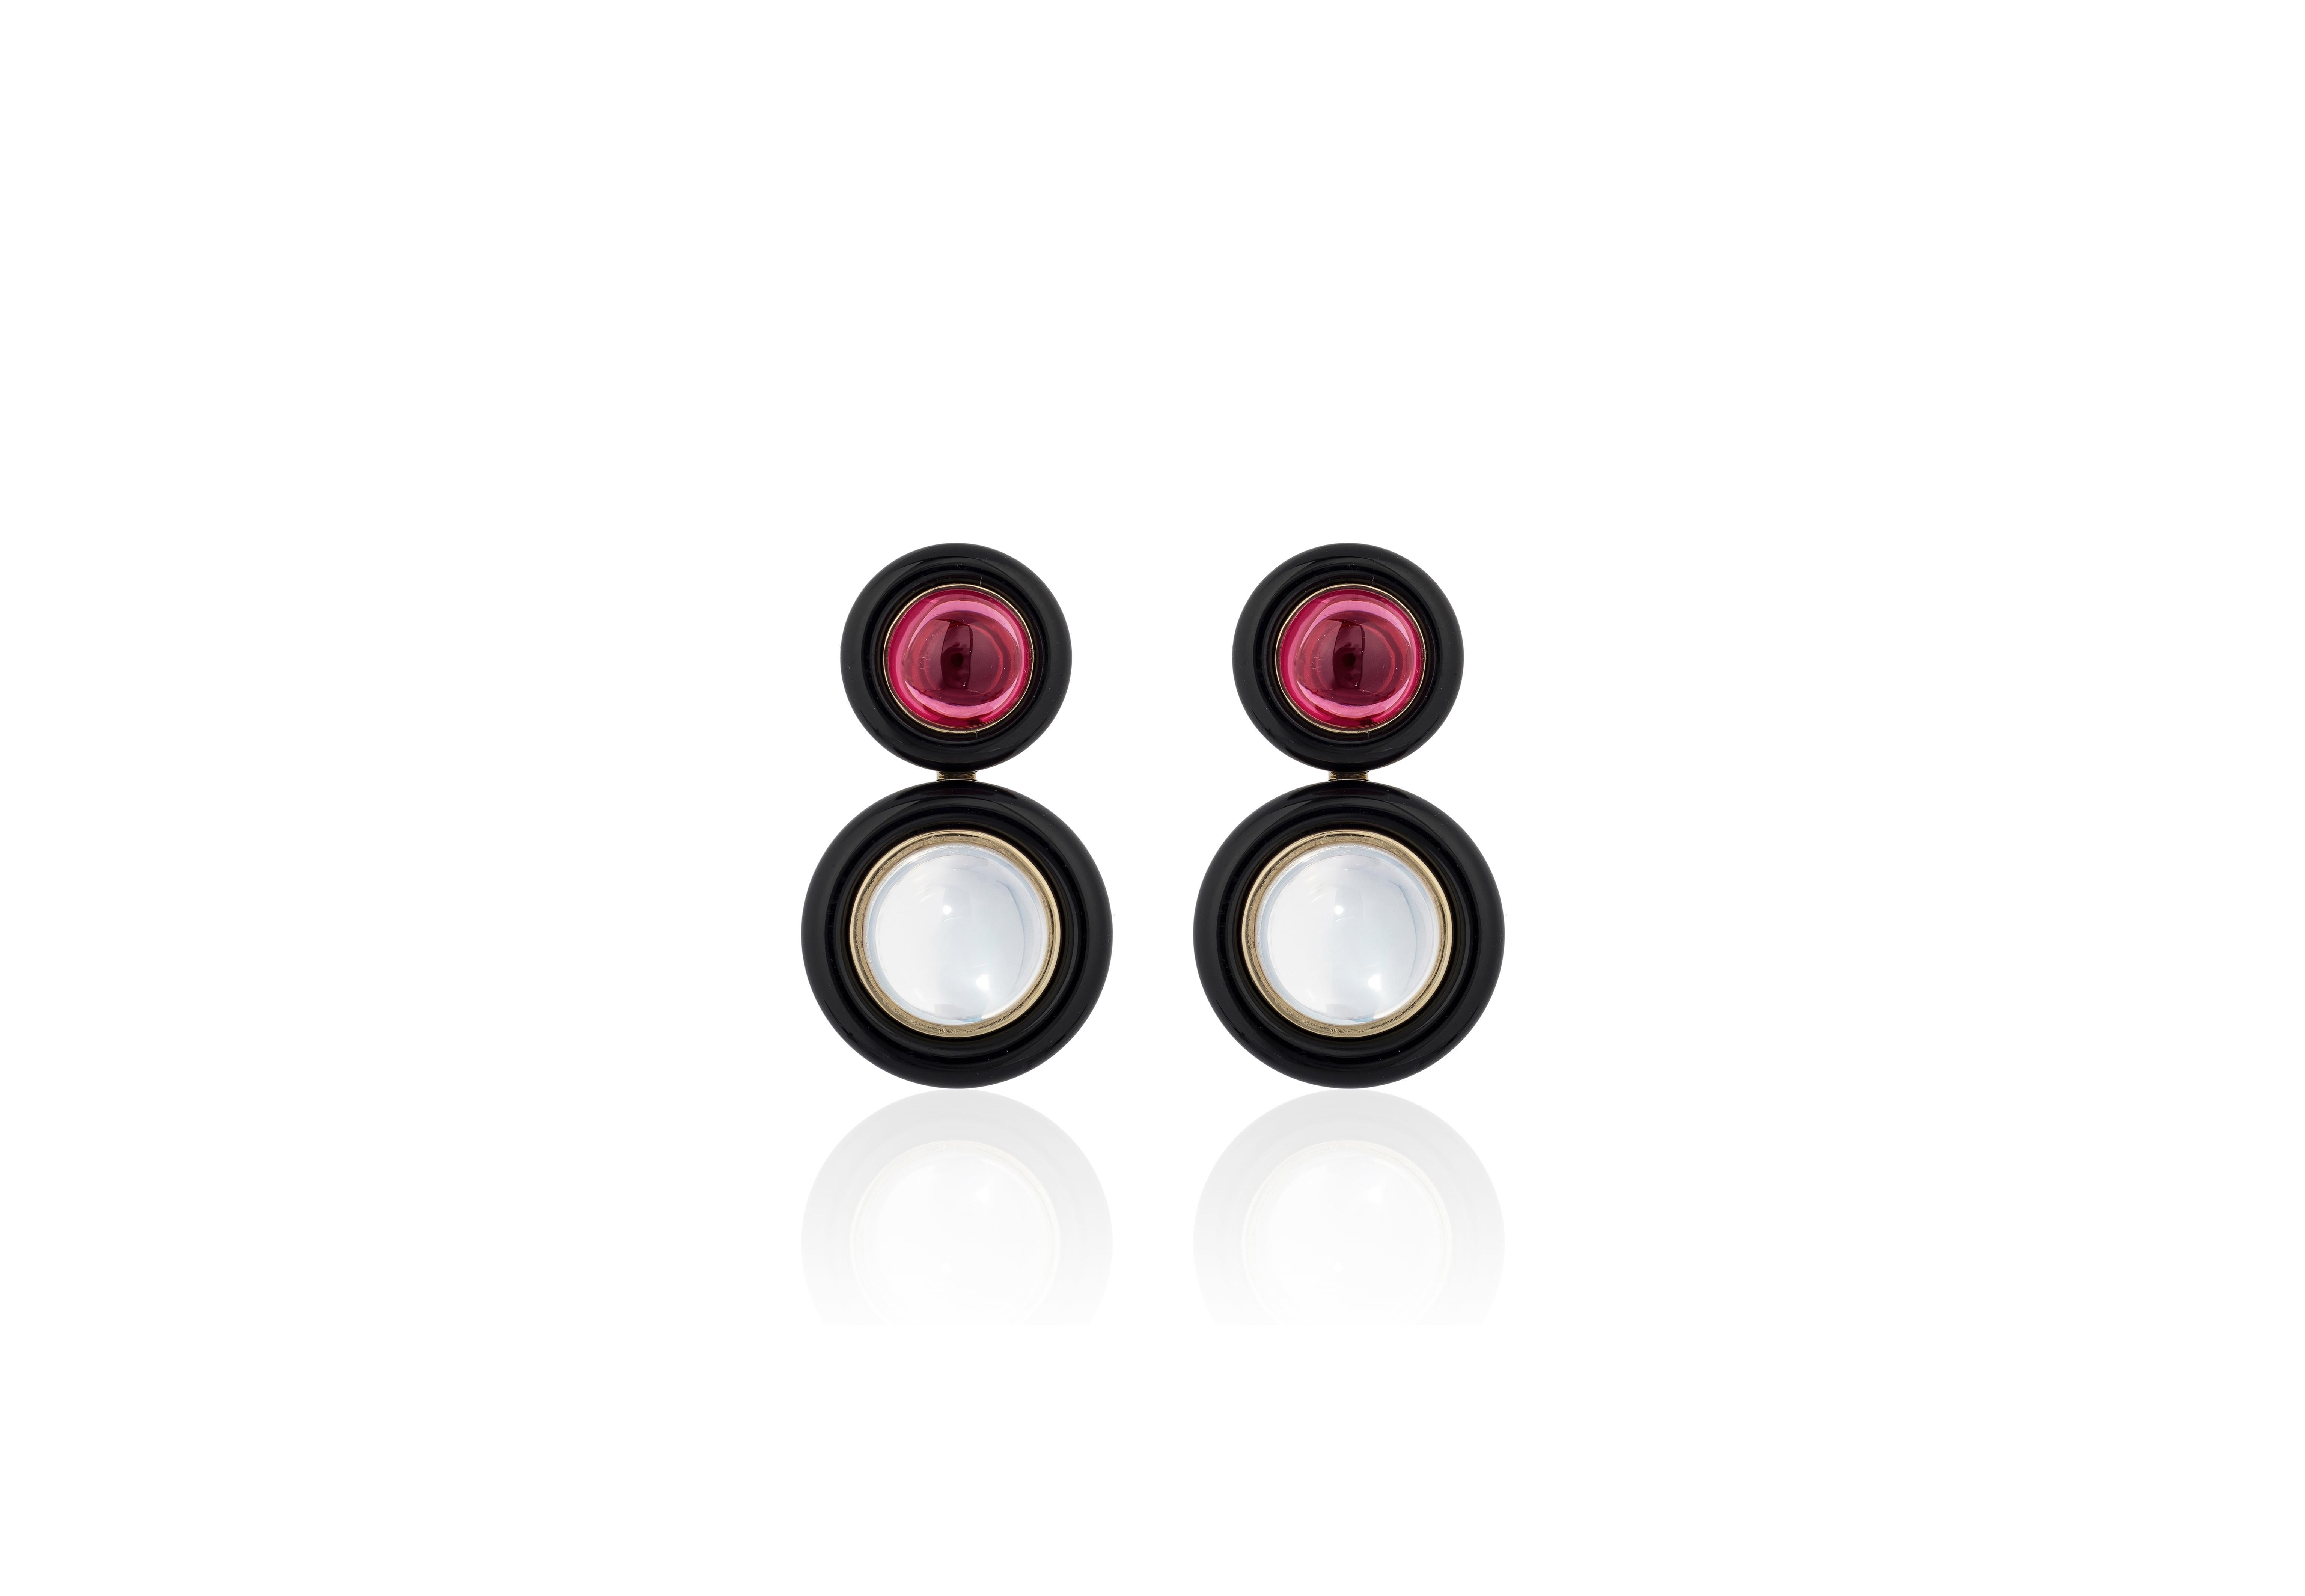 Garnet and Moon Quartz Earrings with Onyx Ring Surround in 18K Yellow Gold, from 'Limited Edition’.
These limited edition items are just that! Limited! 
Feel the exclusiveness in every piece from this collection and Feel the love in these limited